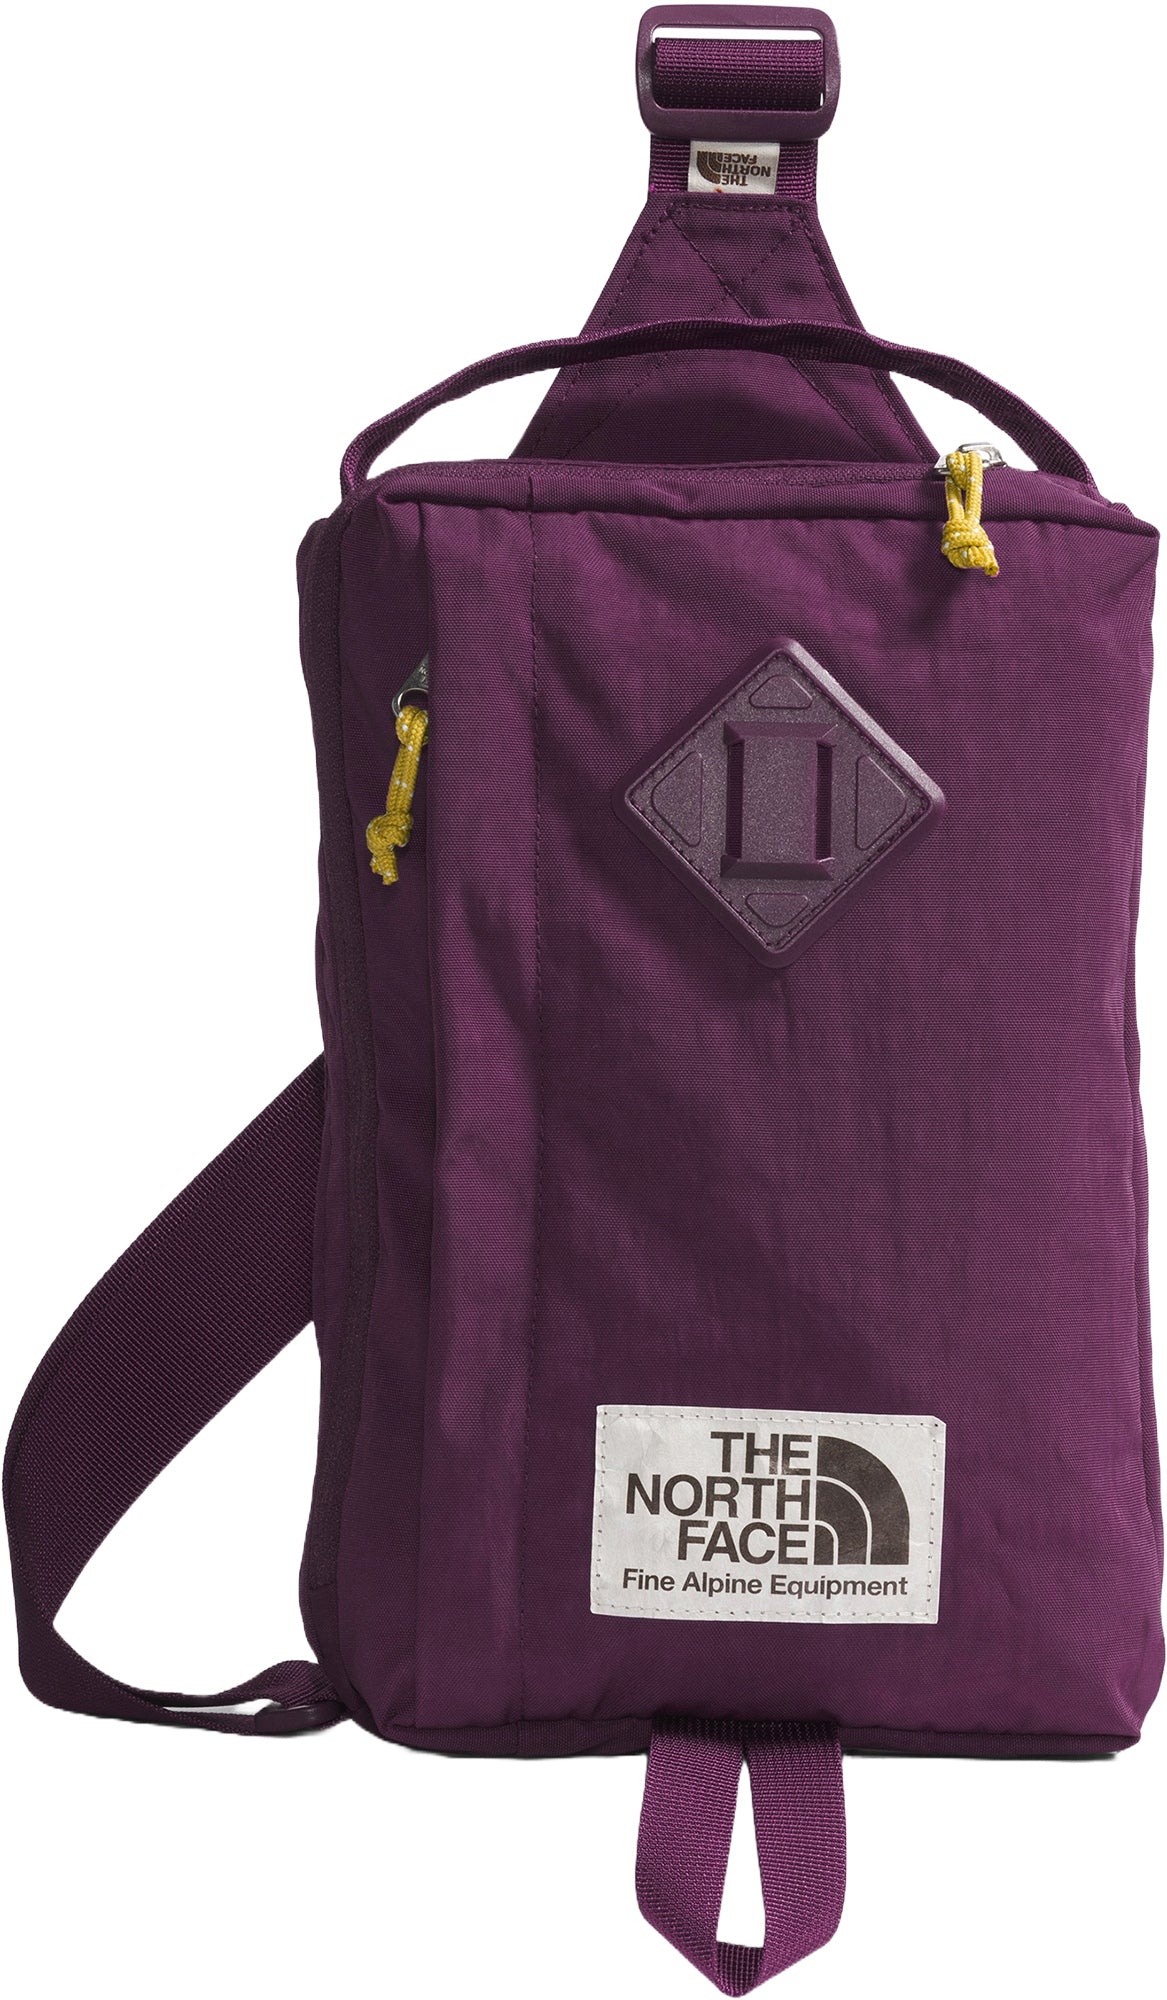 The North Face Berkeley Field Bag 5L | Altitude Sports